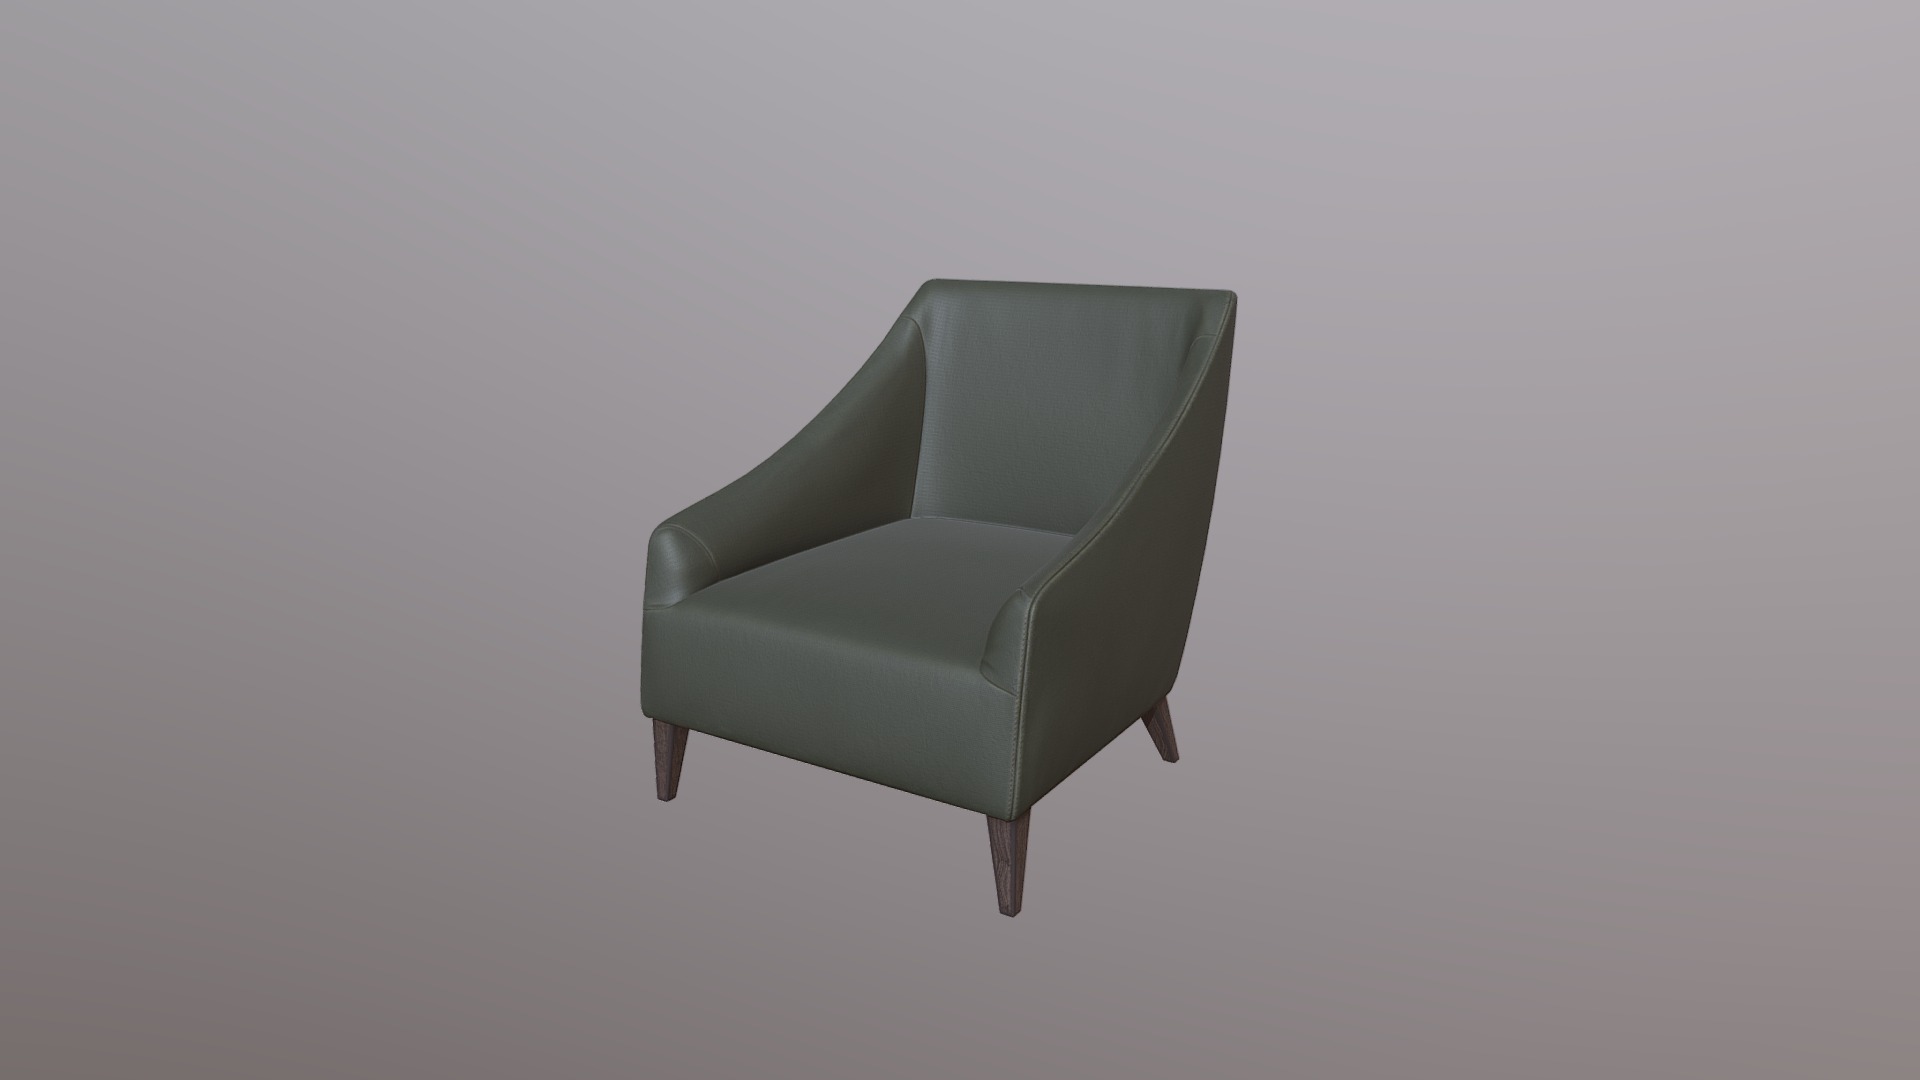 3D model PCX Armchair - This is a 3D model of the PCX Armchair. The 3D model is about a grey chair with a grey cushion.